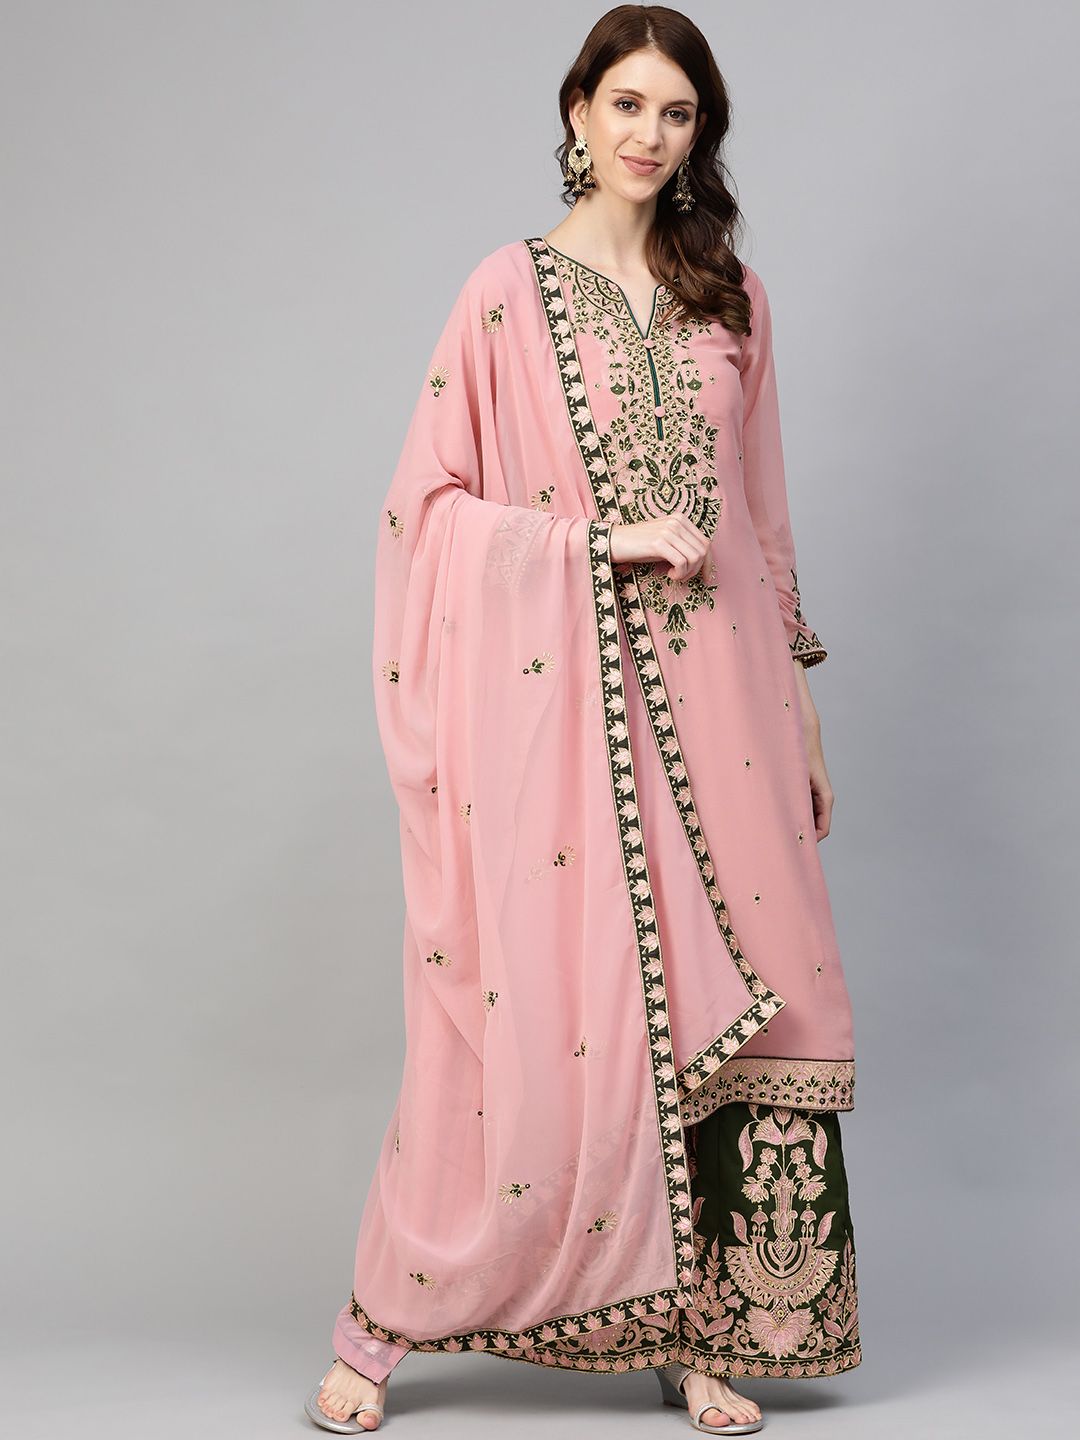 Readiprint Fashions Pink & Olive Green Embroidered Semi-Stitched Dress Material Price in India